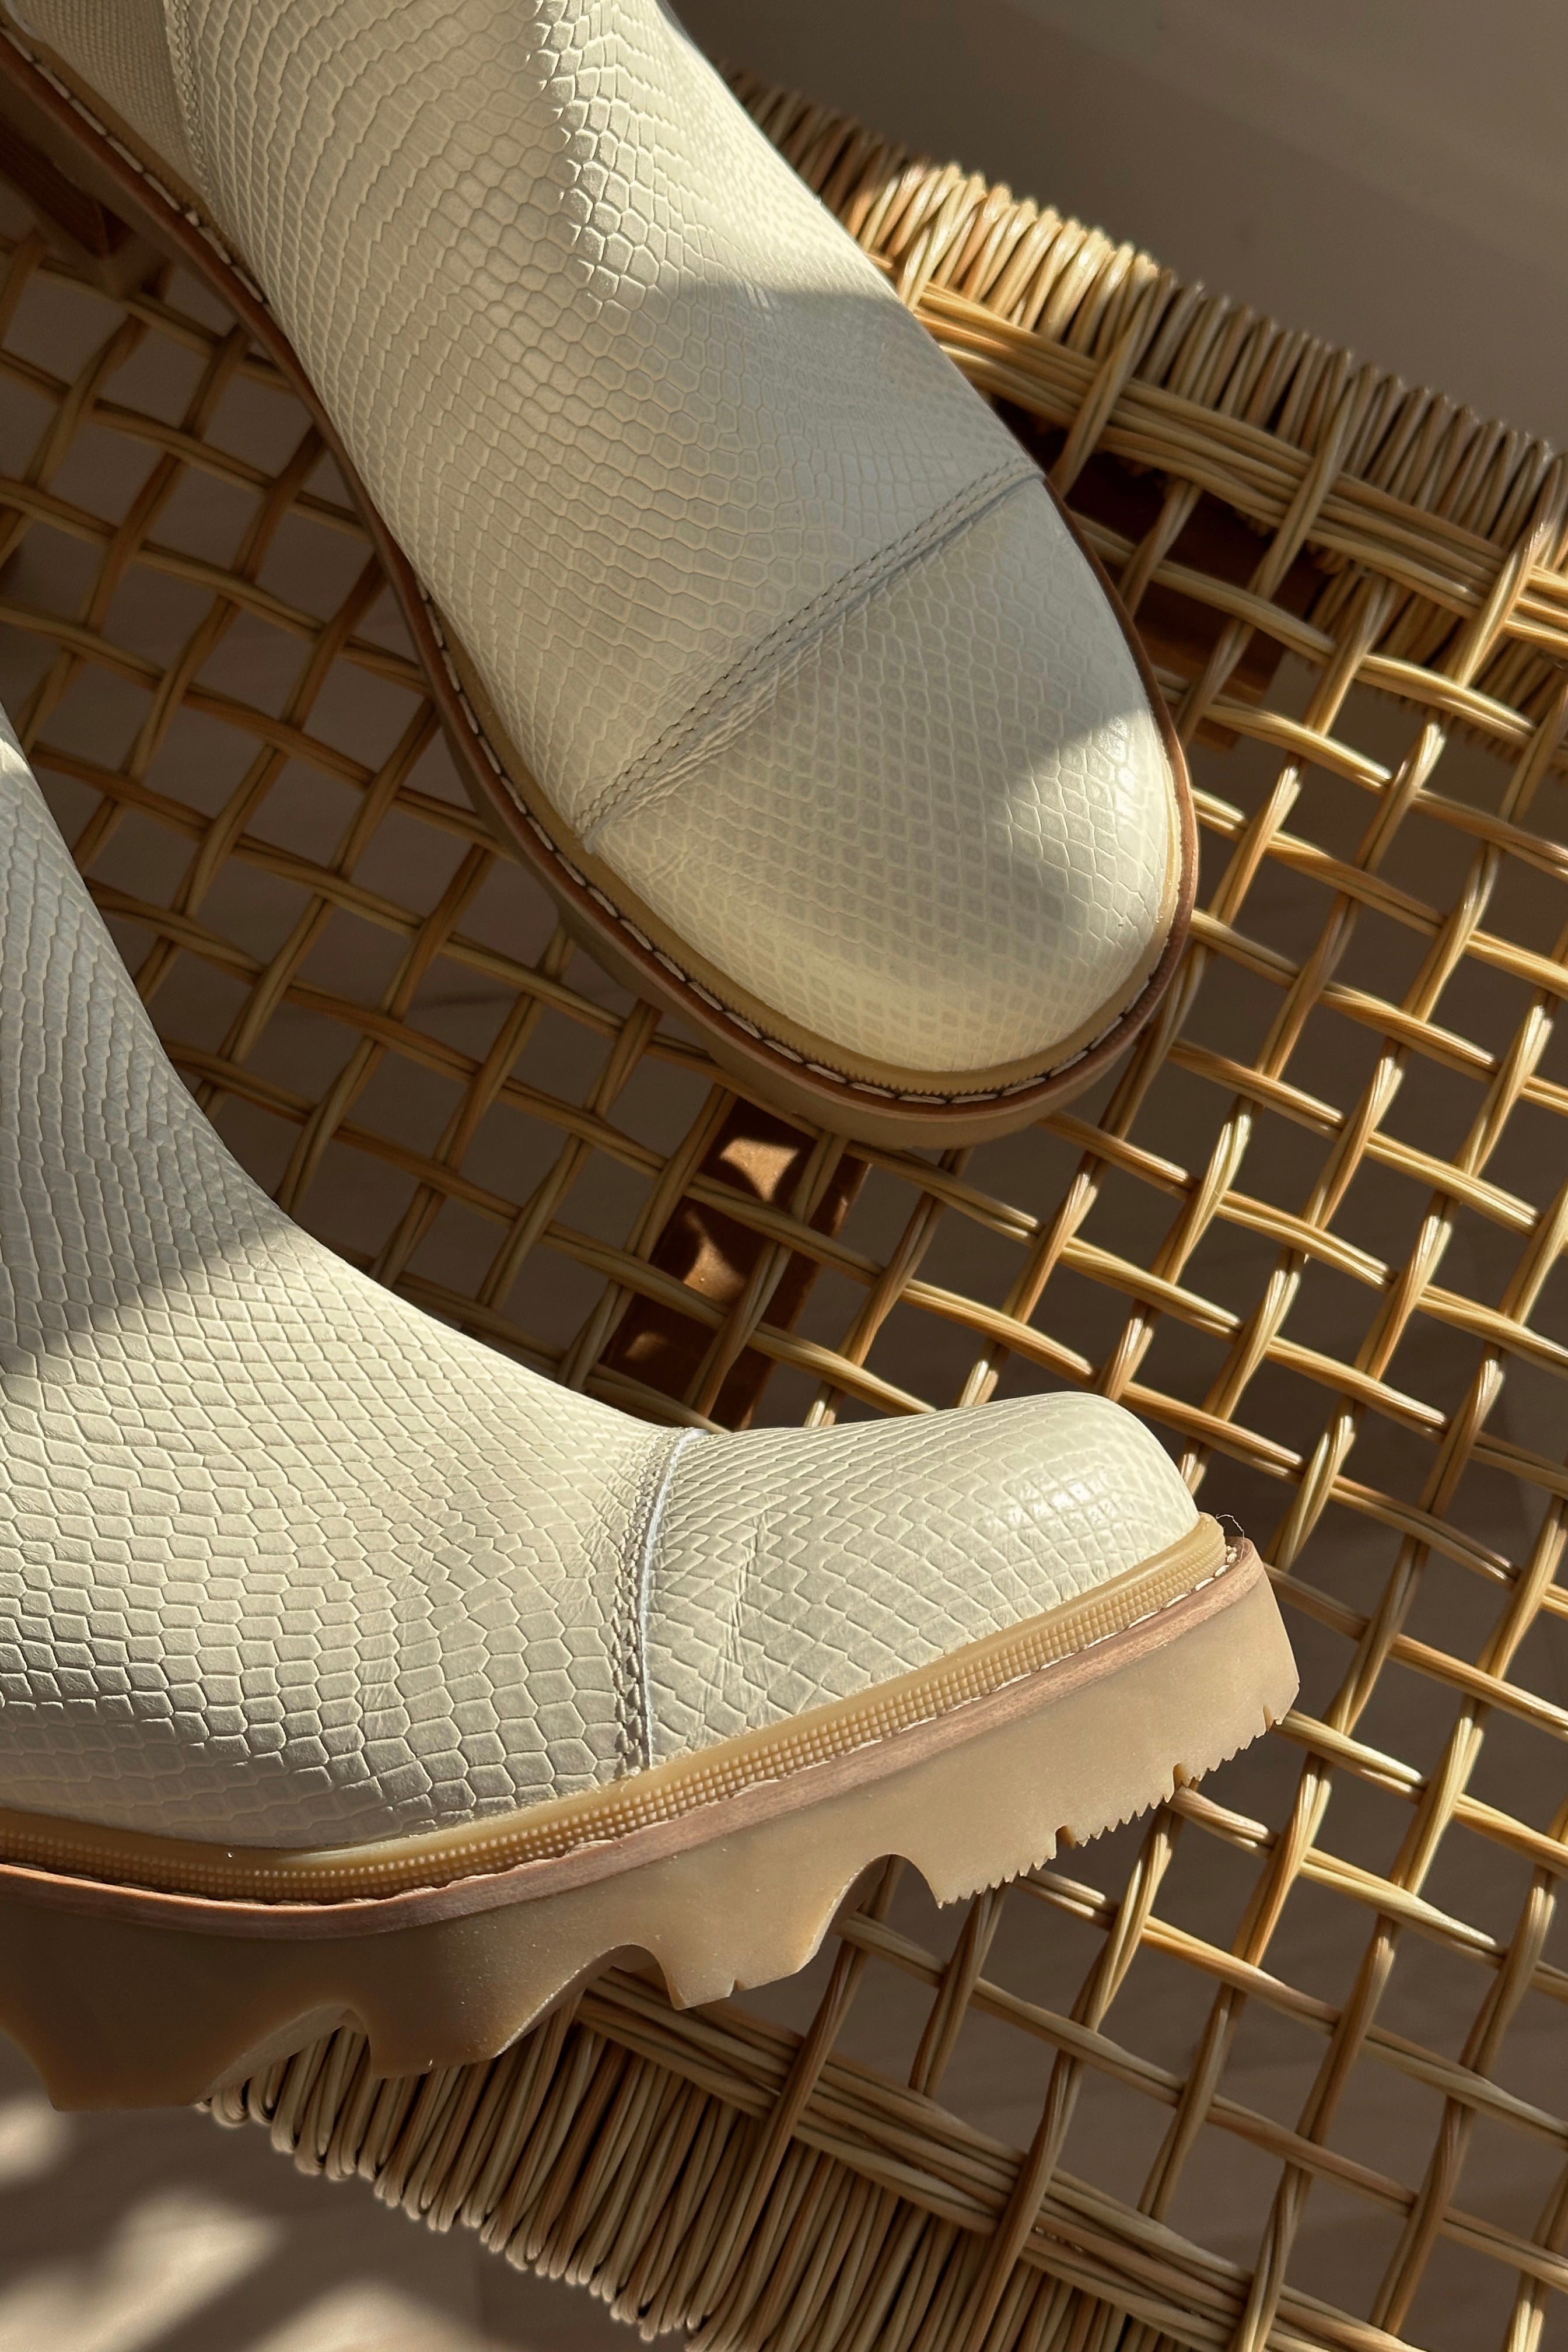 Close up view of the Joan Now Chelsea Bootie in Bleached Ceramic which features cream waterproof leather, ridged light brown sole, heel pull tab, round toe, 2 inch heel height and 3/4" platform height